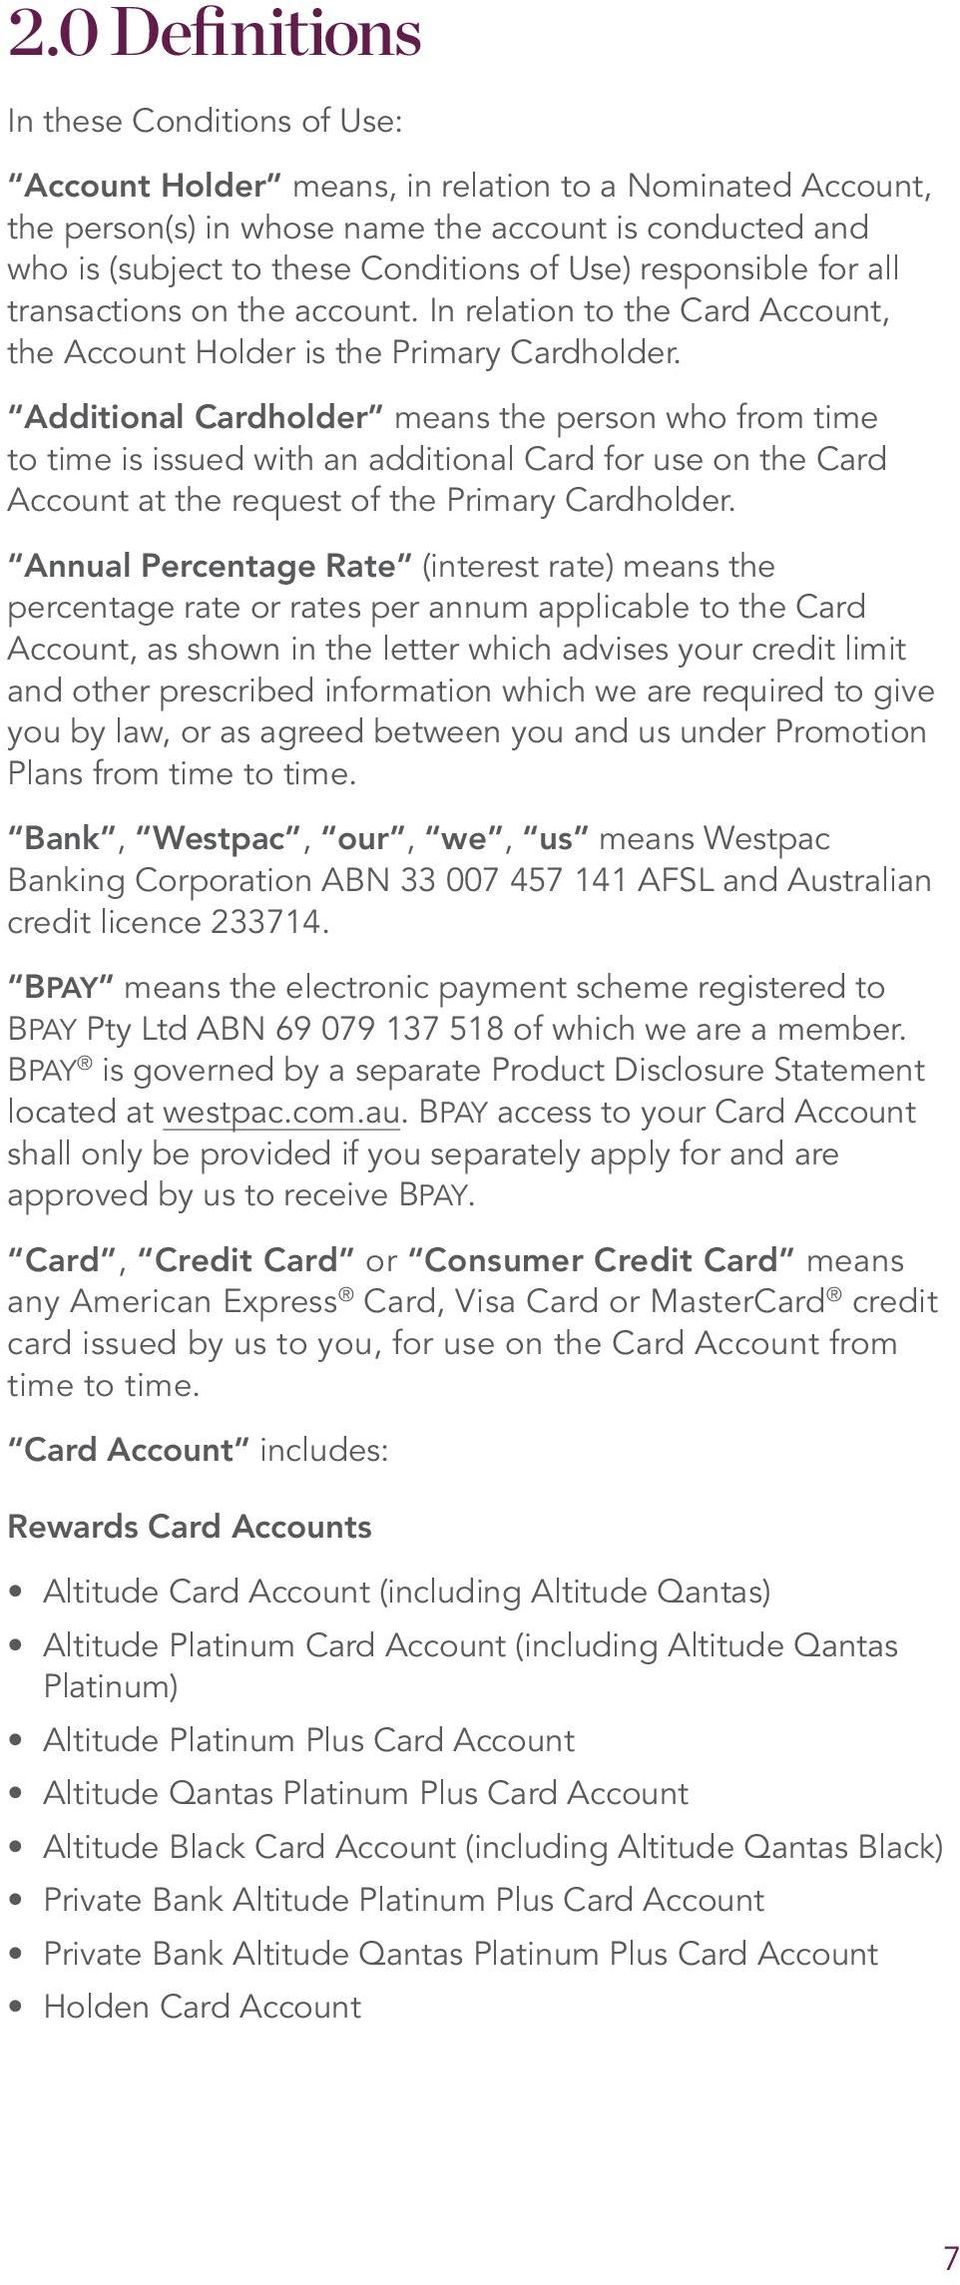 Additional Cardholder means the person who from time to time is issued with an additional Card for use on the Card Account at the request of the Primary Cardholder.